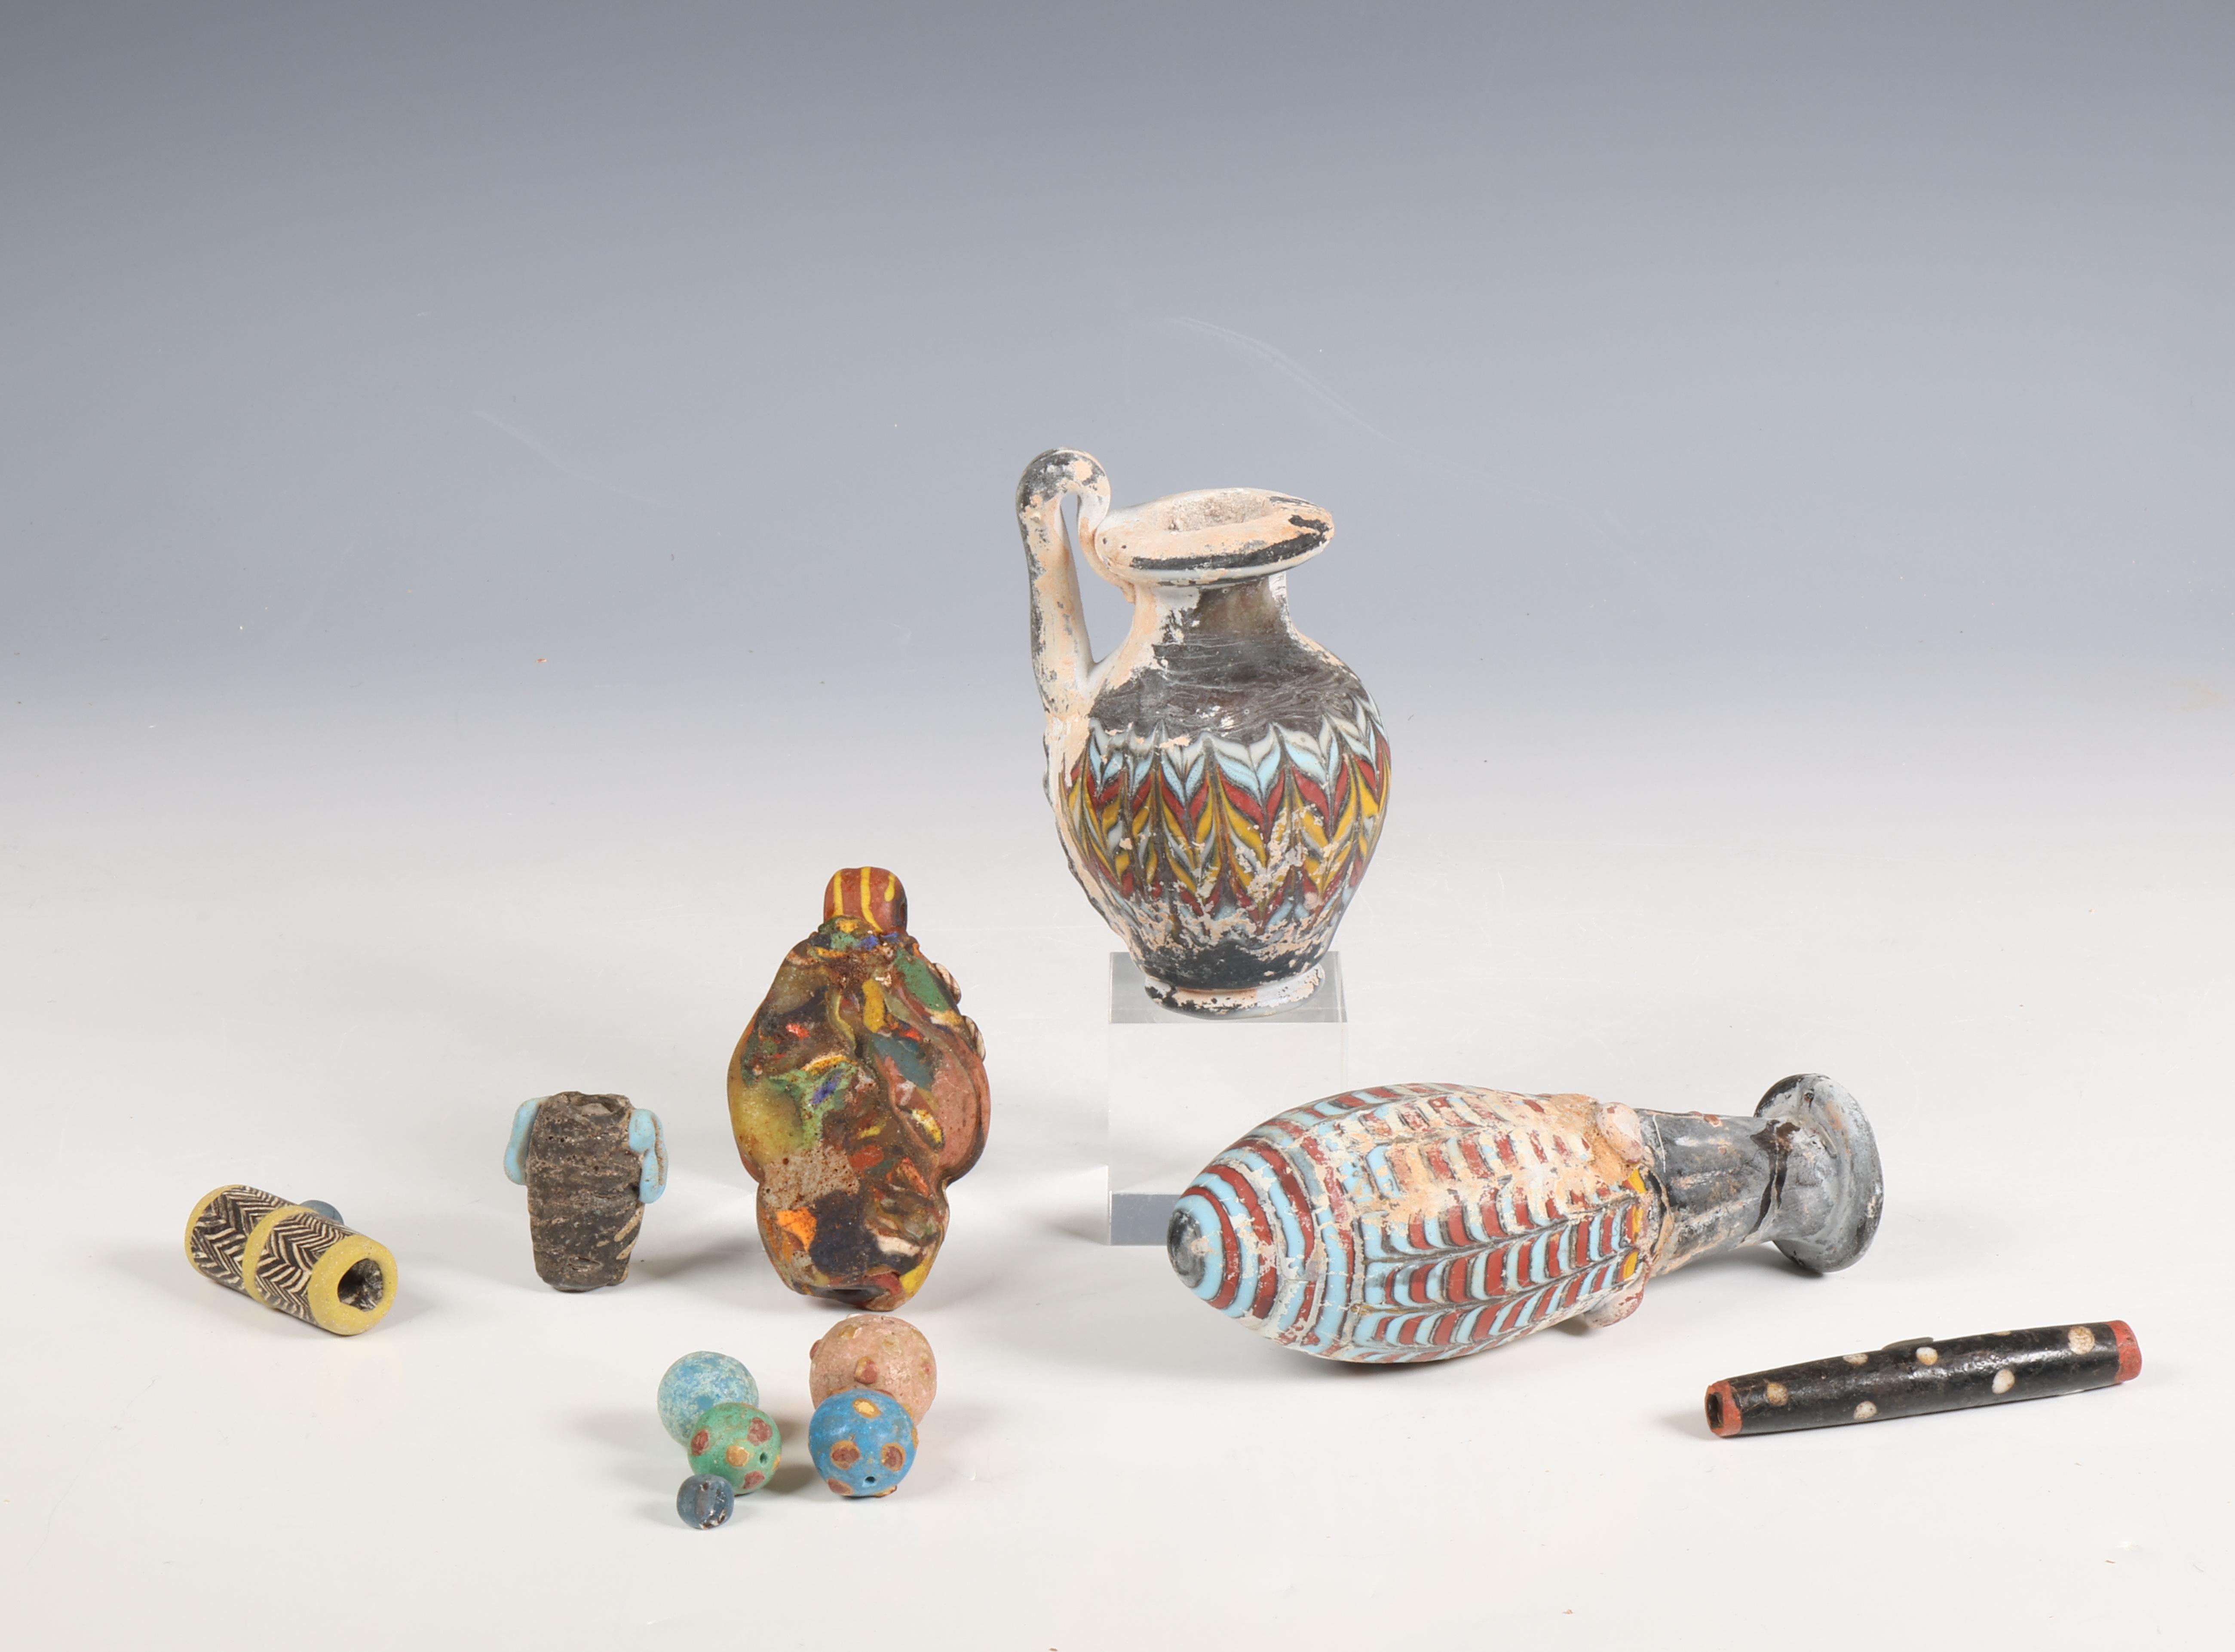 Phoenician style glass face beads, two style glass flask and various glass beads. - Image 2 of 2